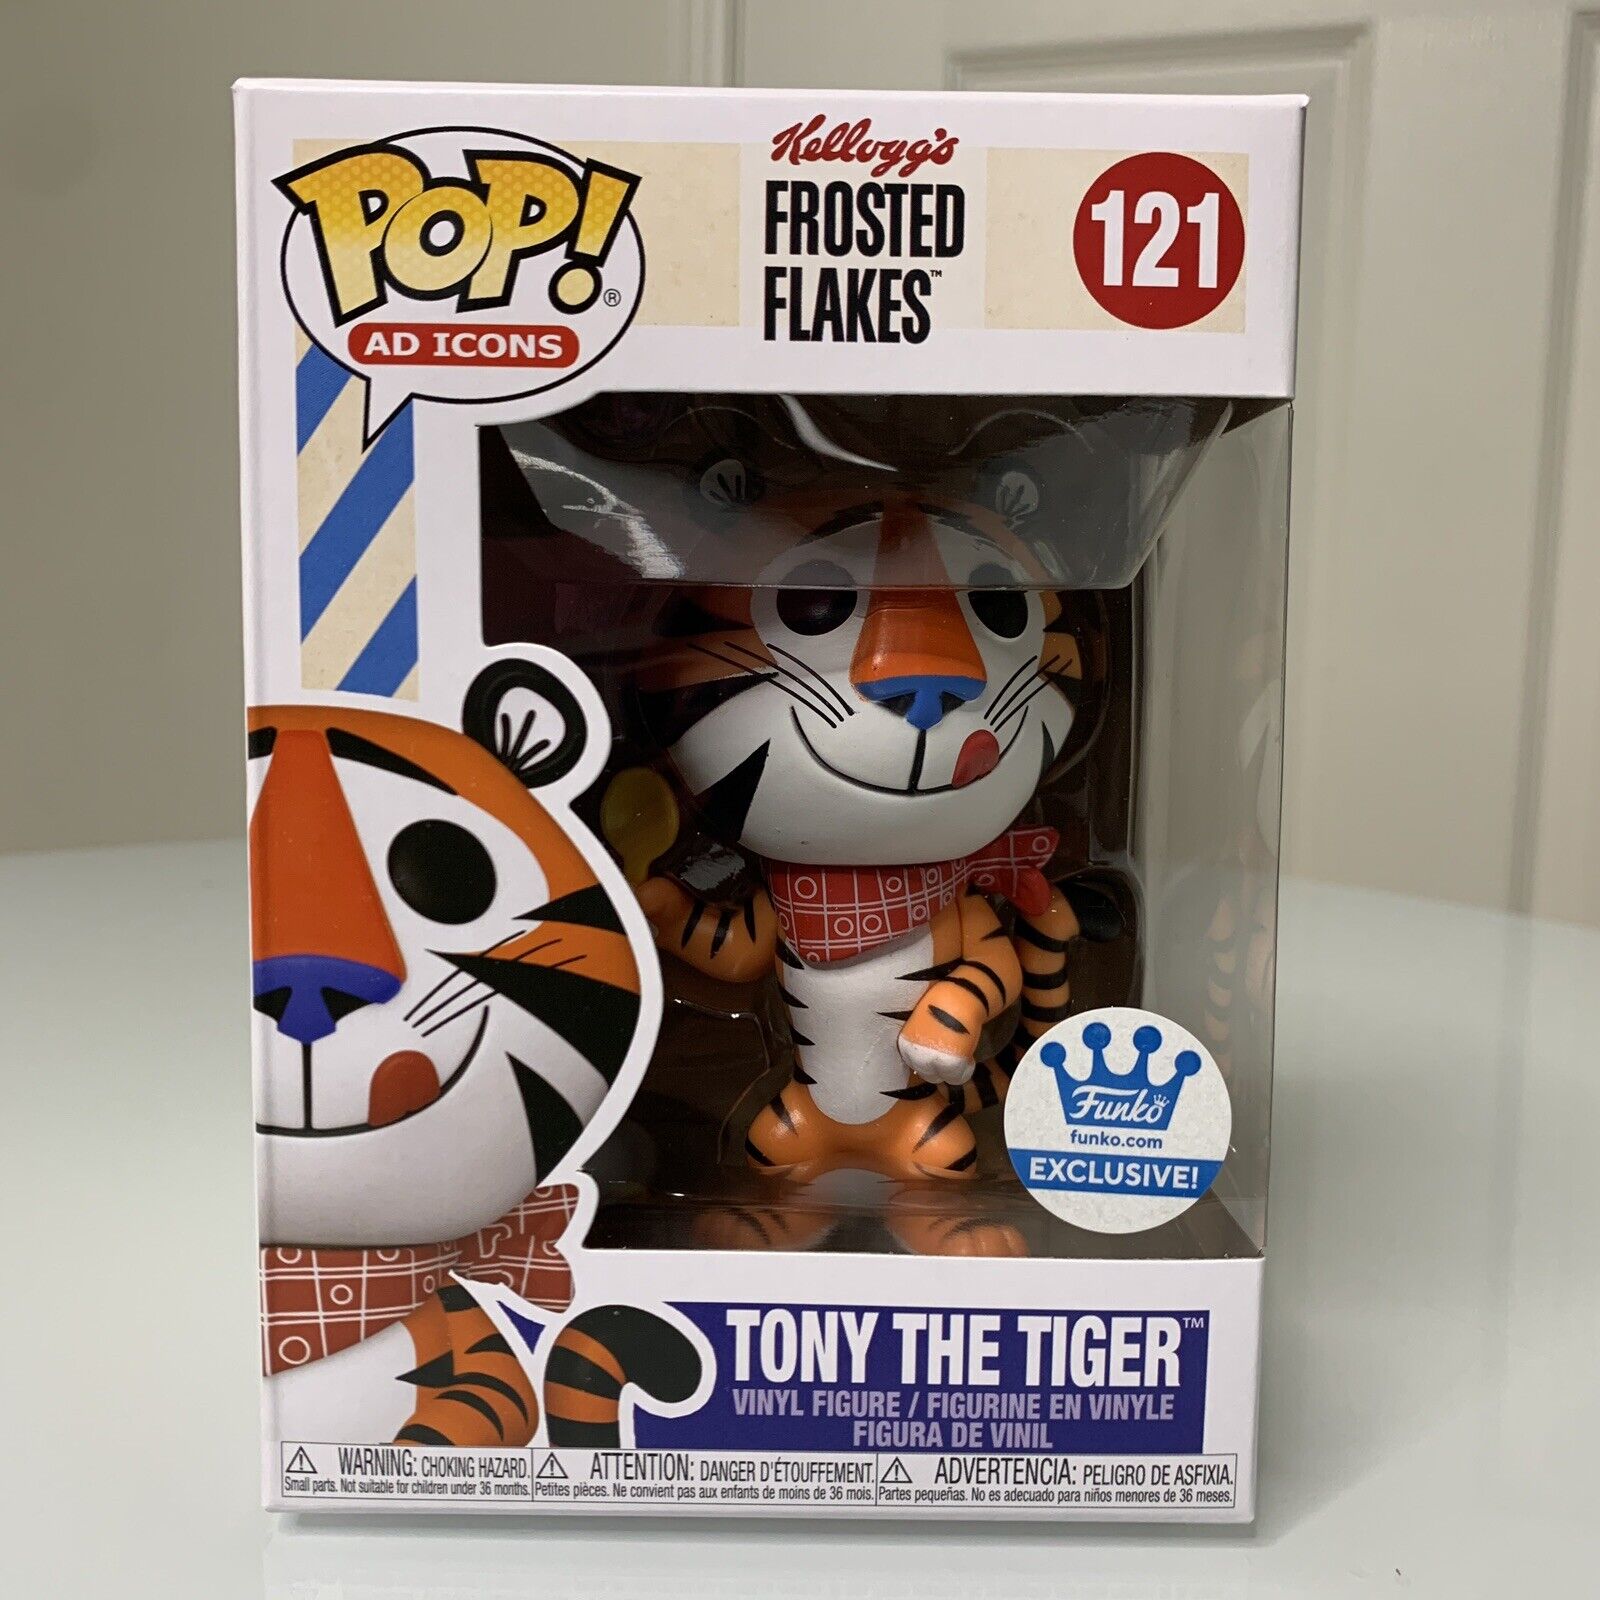 Funko Pop Kellogg’s Frosted Flakes Shop Exclusive - Retro Tony The Tiger #121